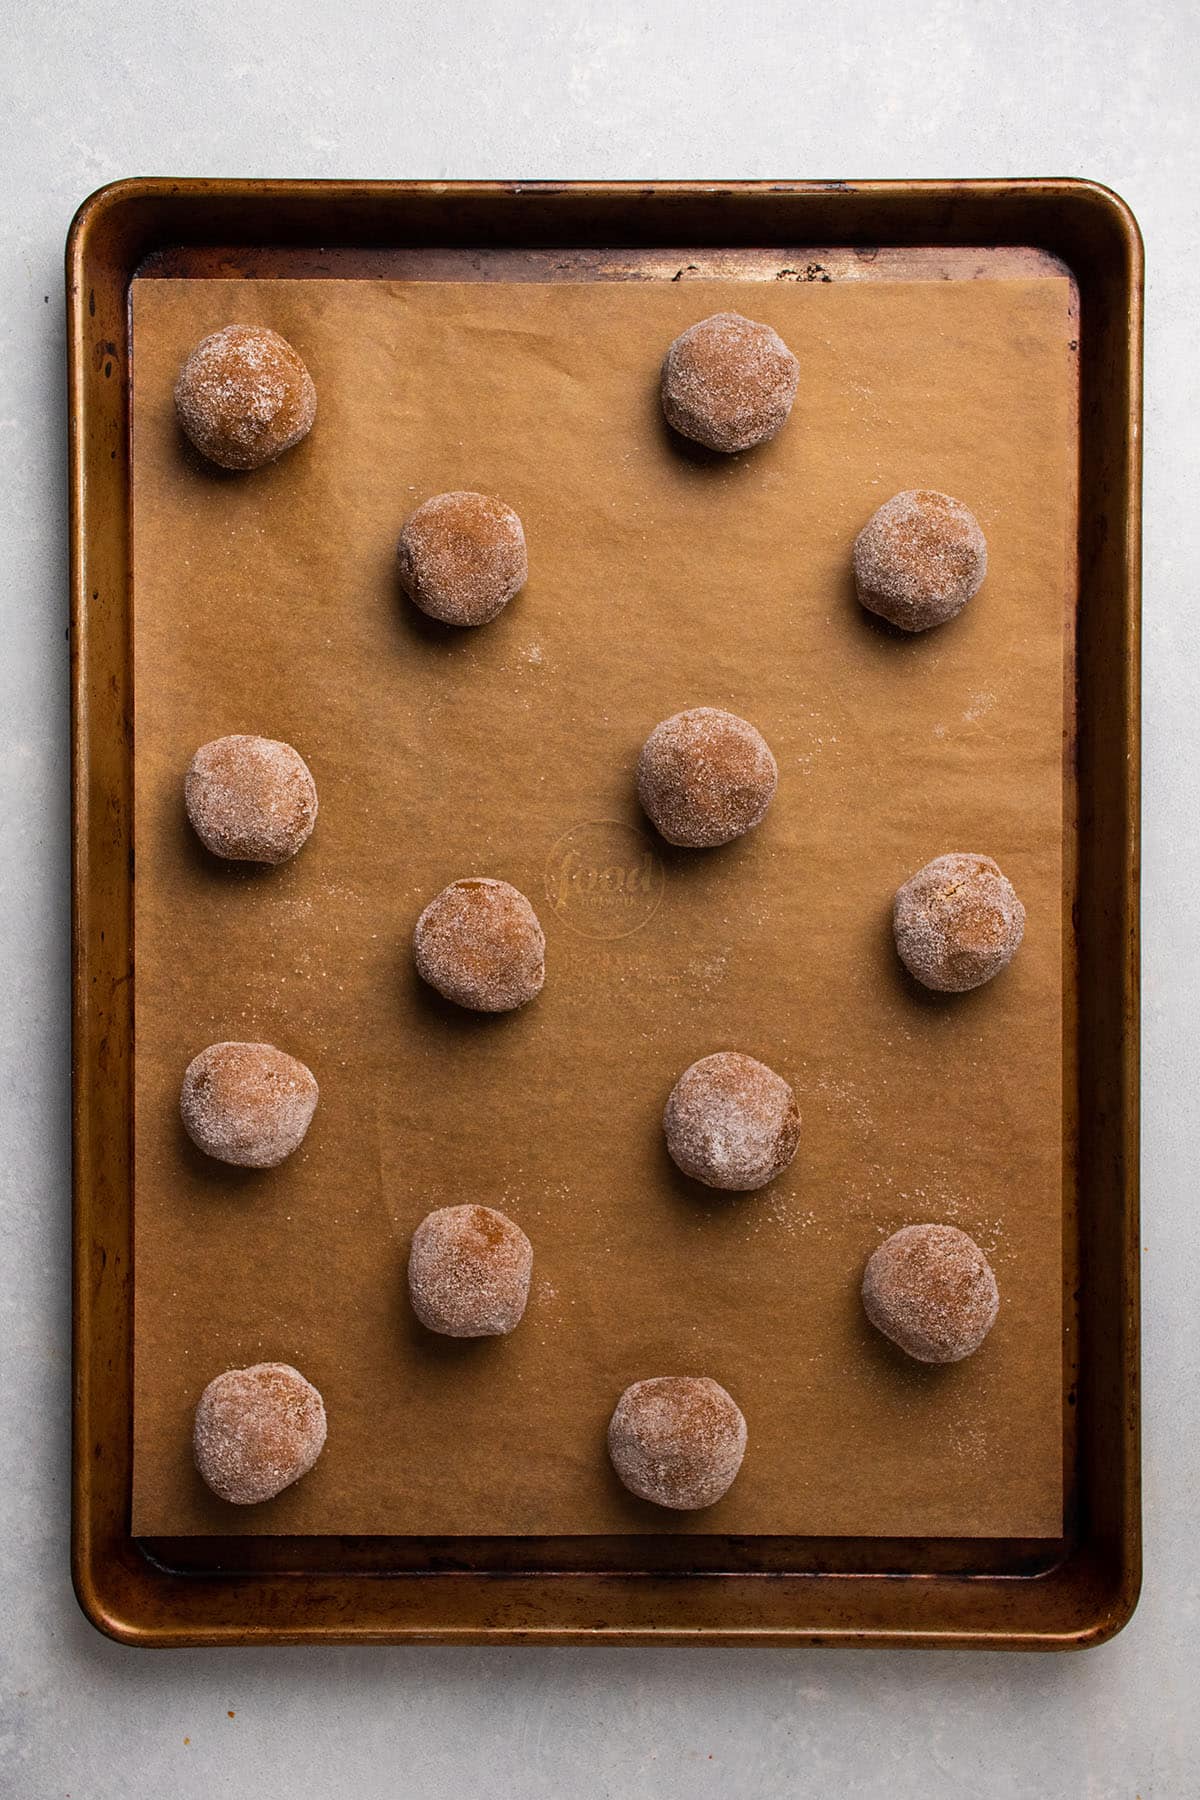 Gingersnap dough on a cookie sheet before baking.